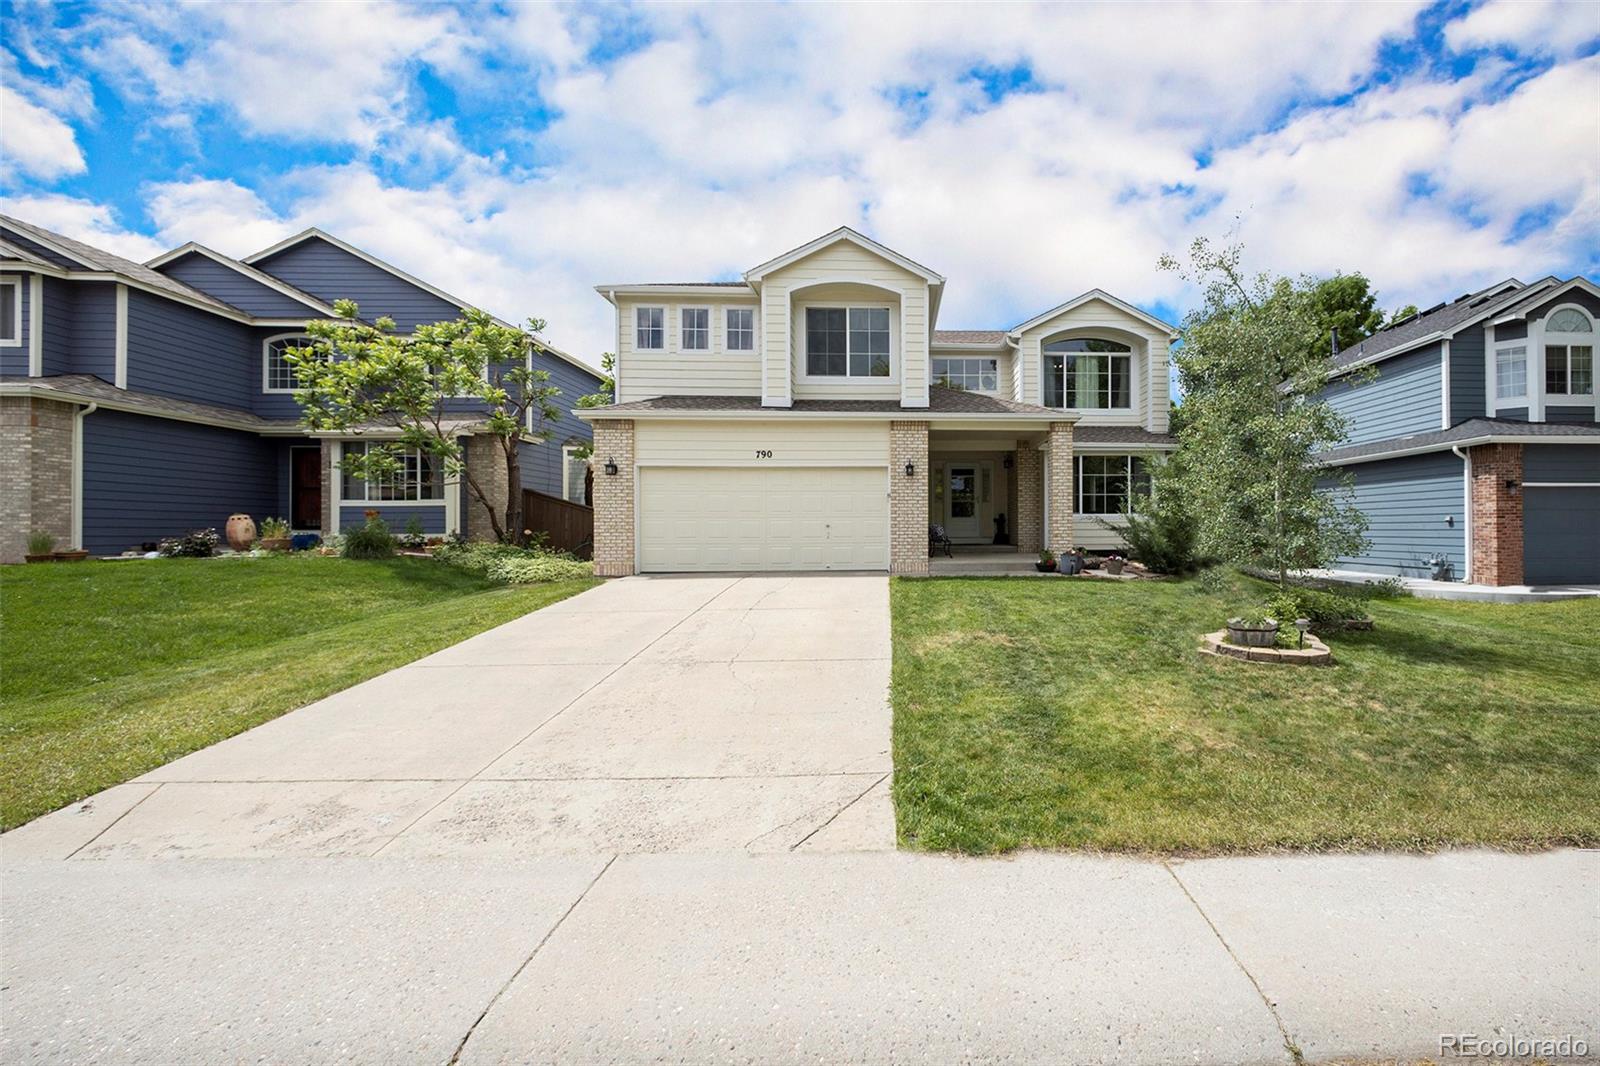 Report Image for 790  Redwood Court,Highlands Ranch, Colorado